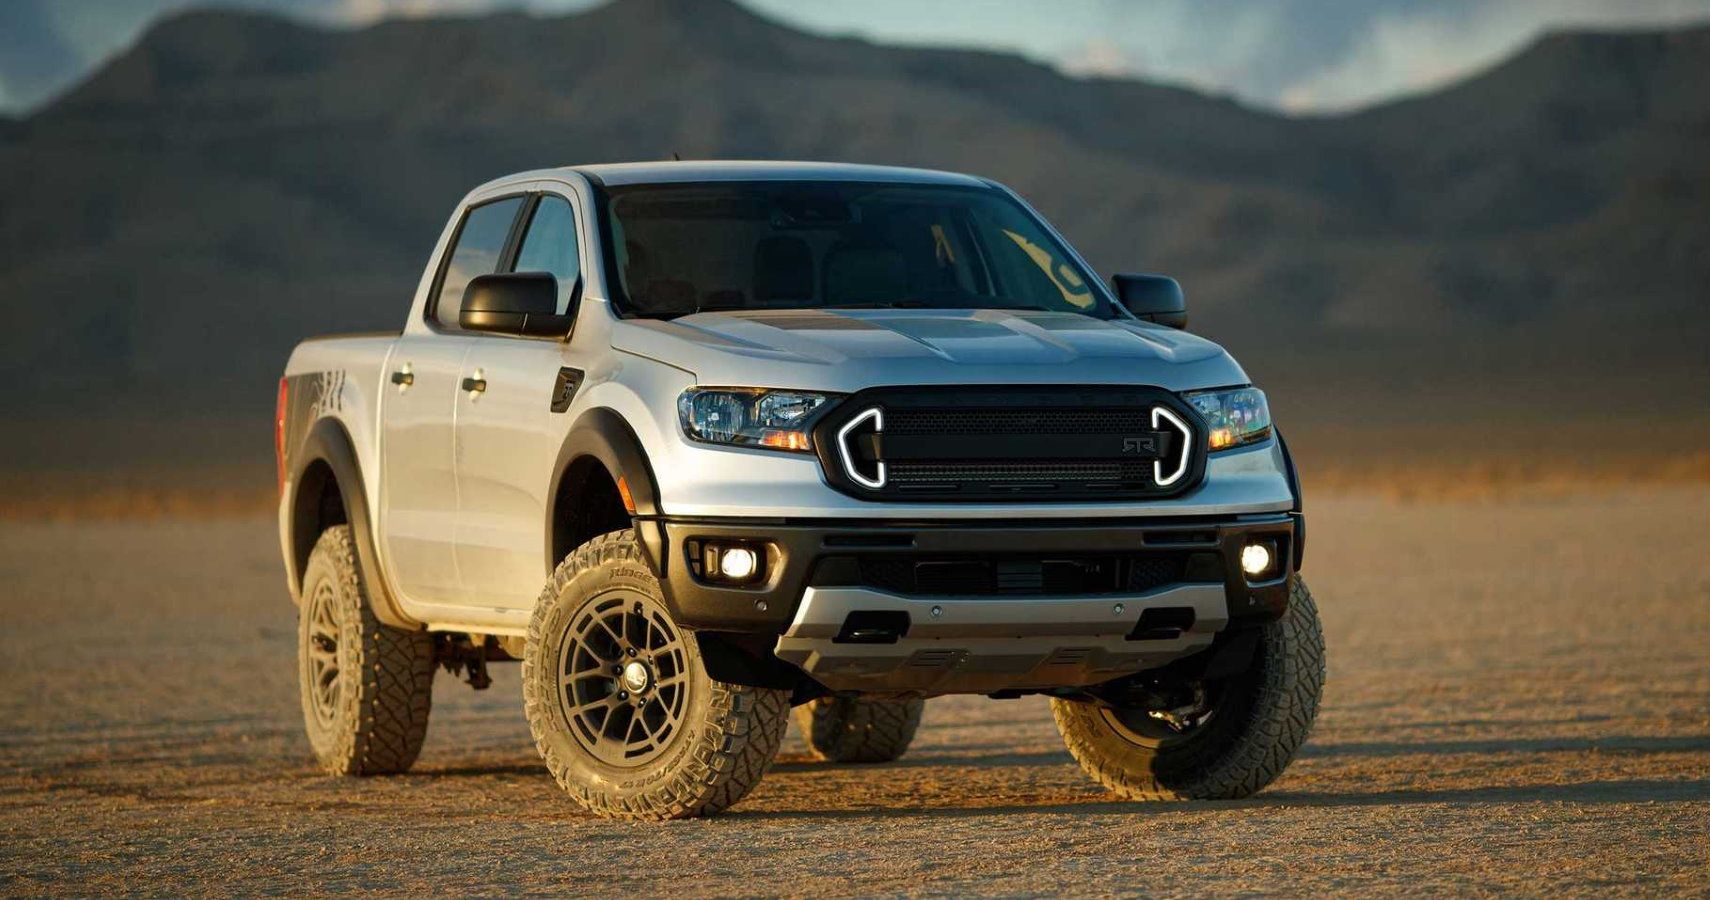 RTR Ford Ranger Brings Off-Road Dominance To Mid-Size Pickup